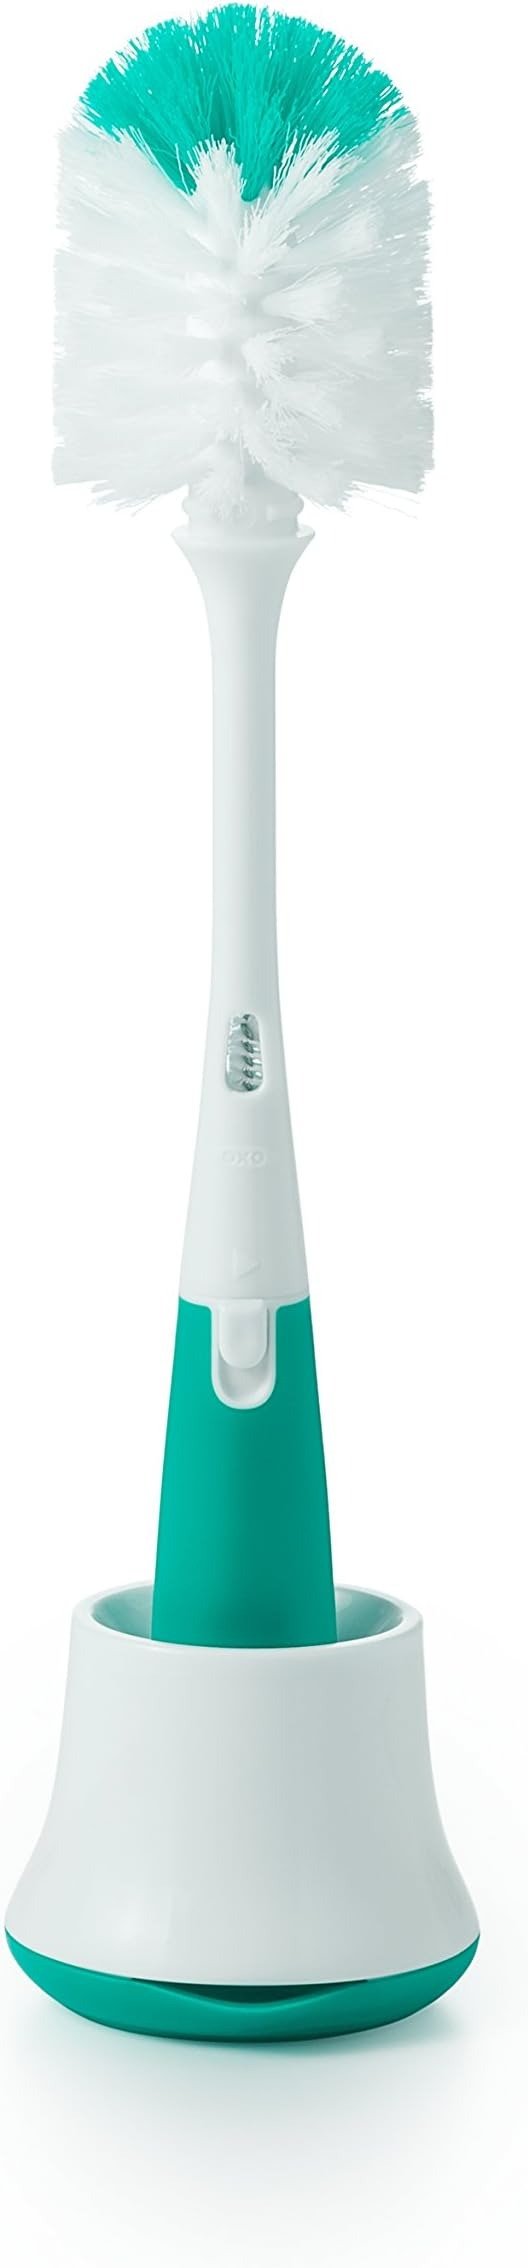 OXO Tot Bottle Brush with Nipple Cleaner and Stand - Teal, 1 Count (Pack of 1)